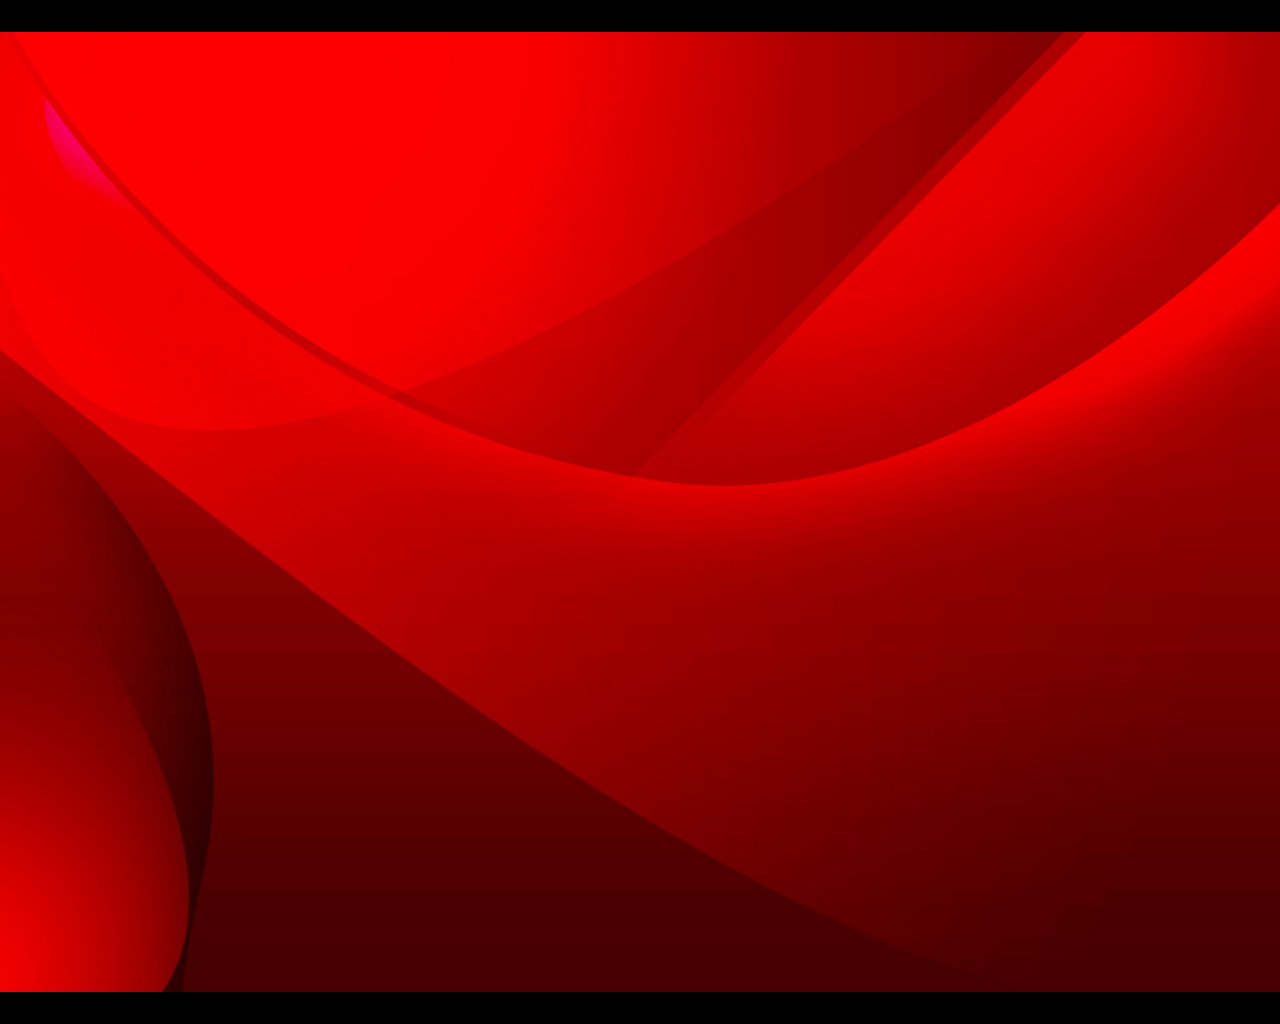 Red and black backgrounds plain background light picture 1225 Black